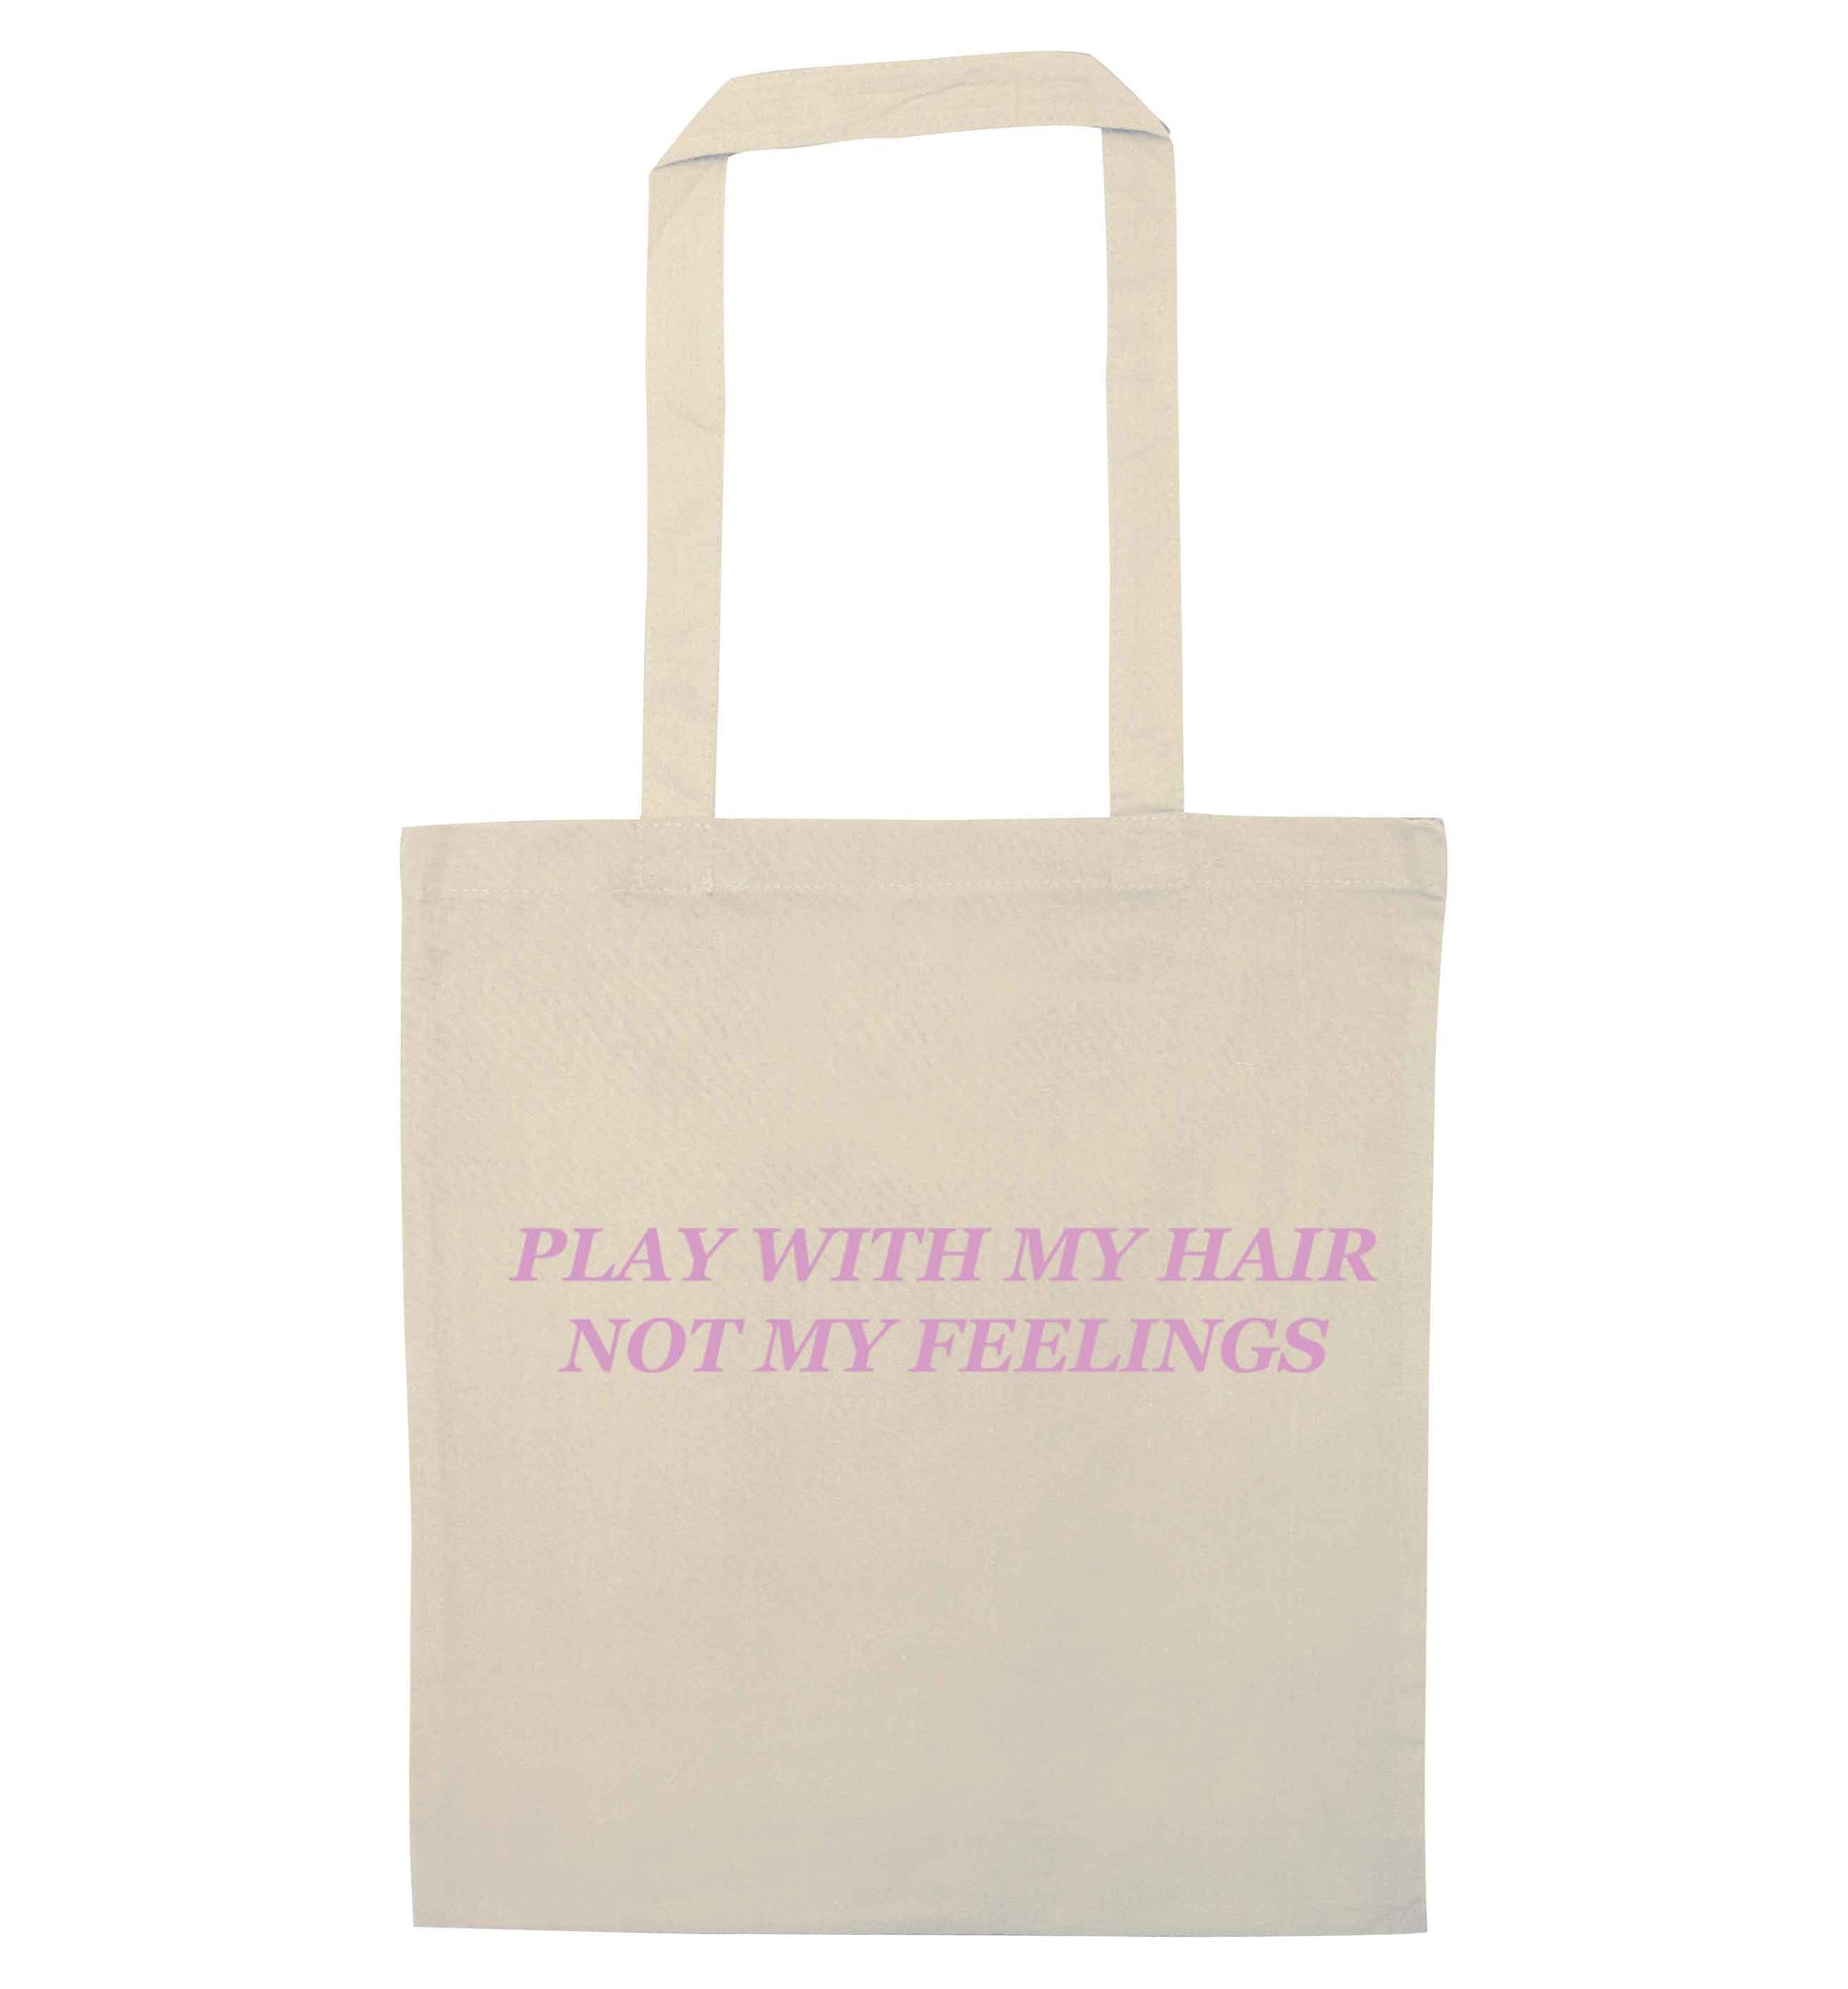 Play with my hair not my feelings natural tote bag